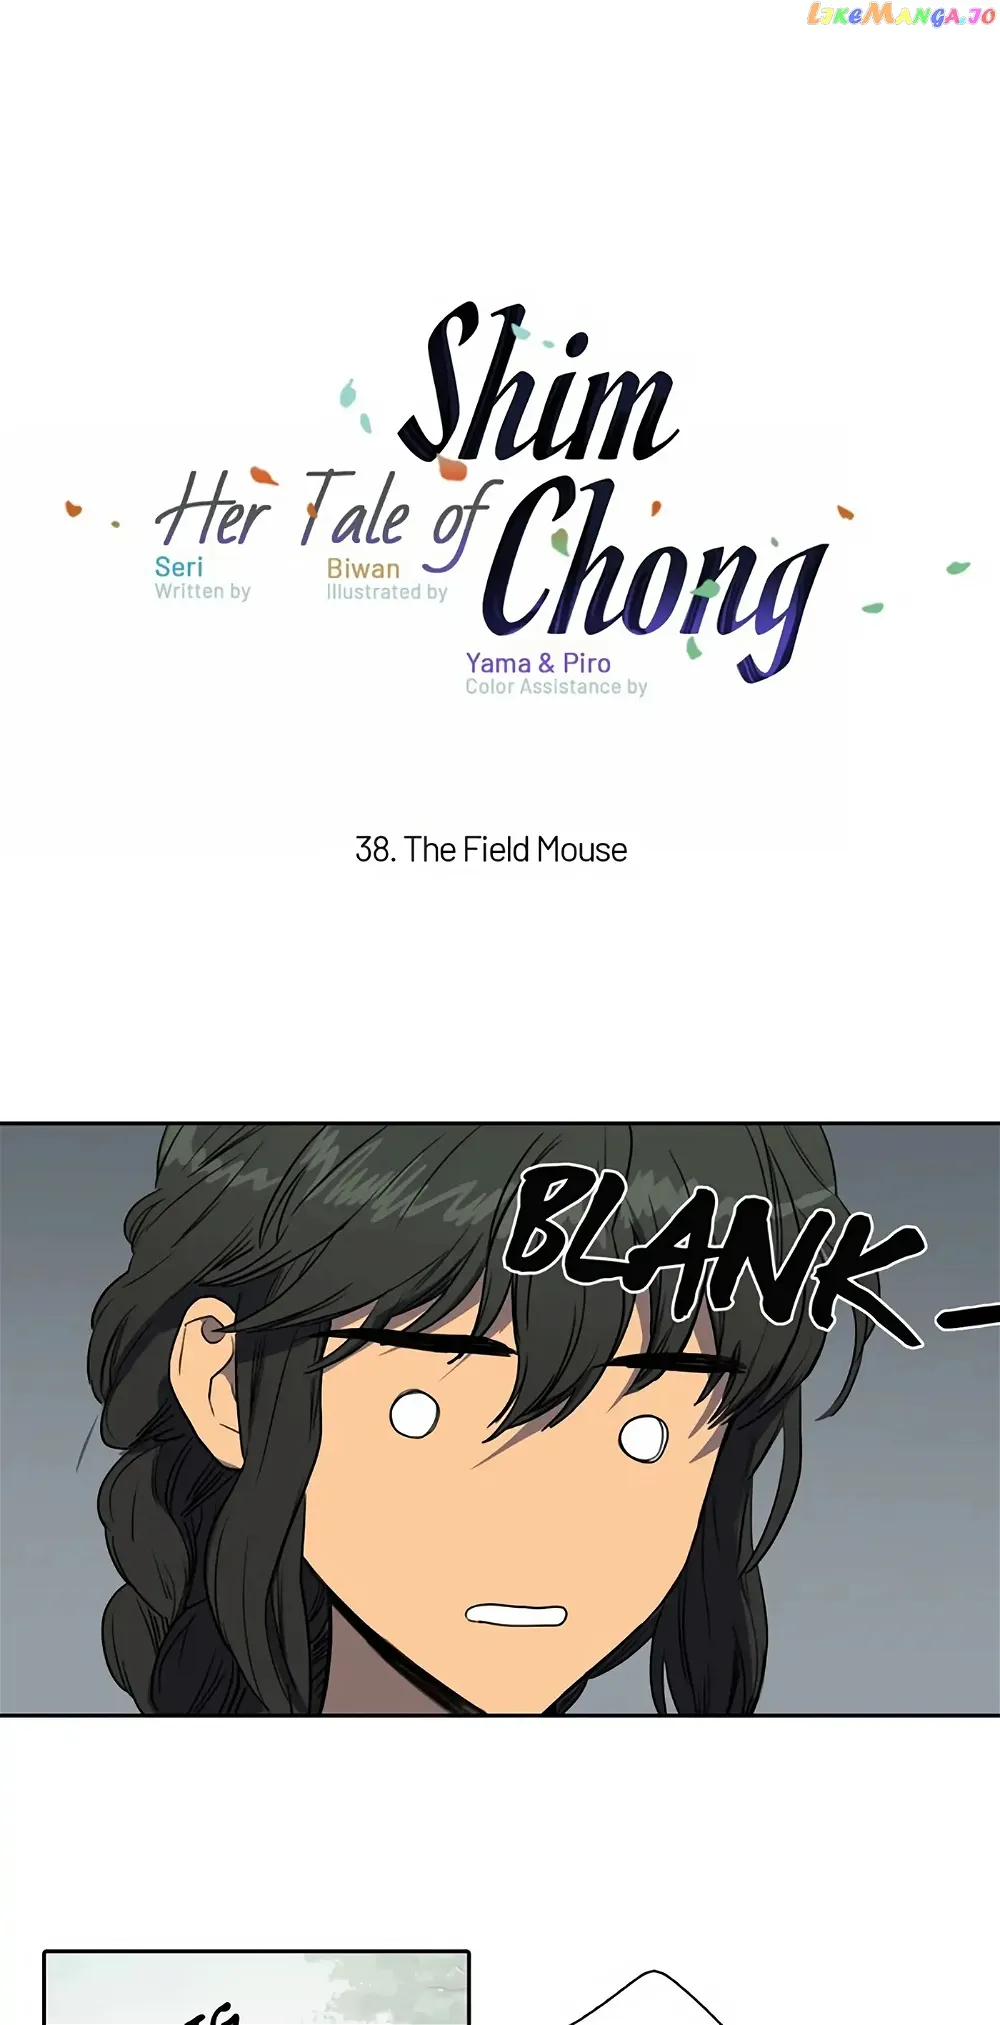 Her Tale of Shim Chong Chapter 39 - Page 1